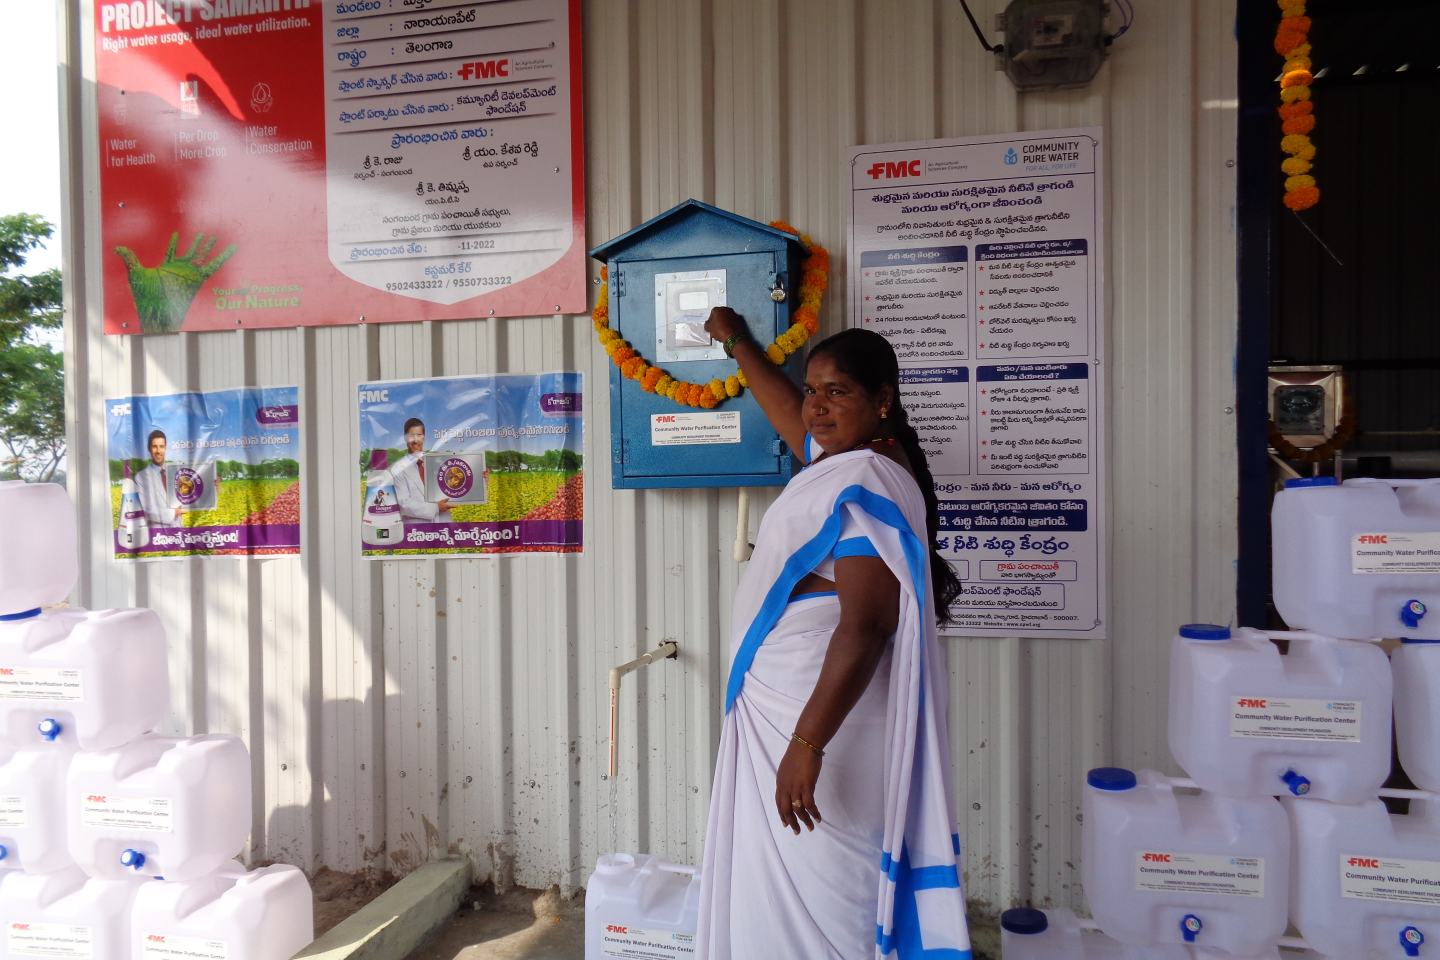 Resident of Narayanpet, India visits the village's newly installed water filtration plant, courtesy of FMC India. She is wearing a white and blue sari as she smiles at the camera. The new filtration plant in Naraynanpath is one of two water filtration plants in India's Telangana state that were recently inaugurated by FMC India and local dignitaries. 